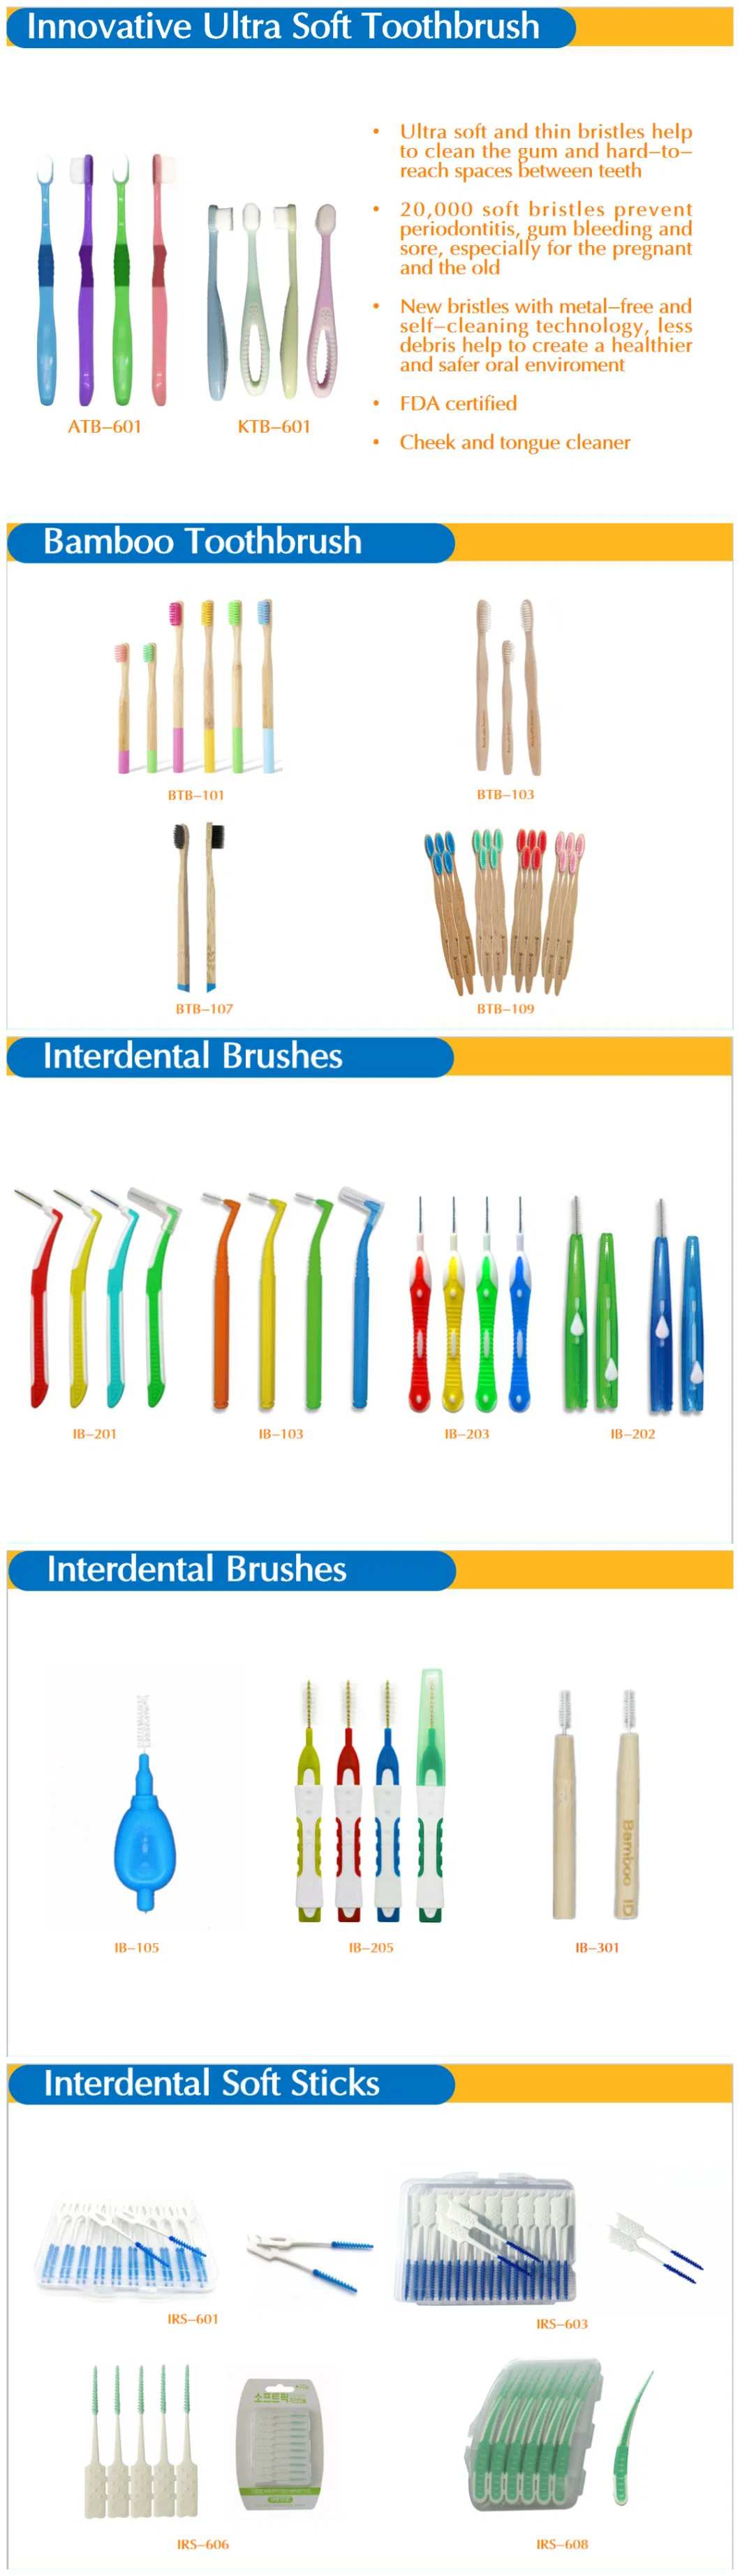 Steel Wire Interdental Toothbrush with Big Thumb Grip for Deep Clean of Teeth